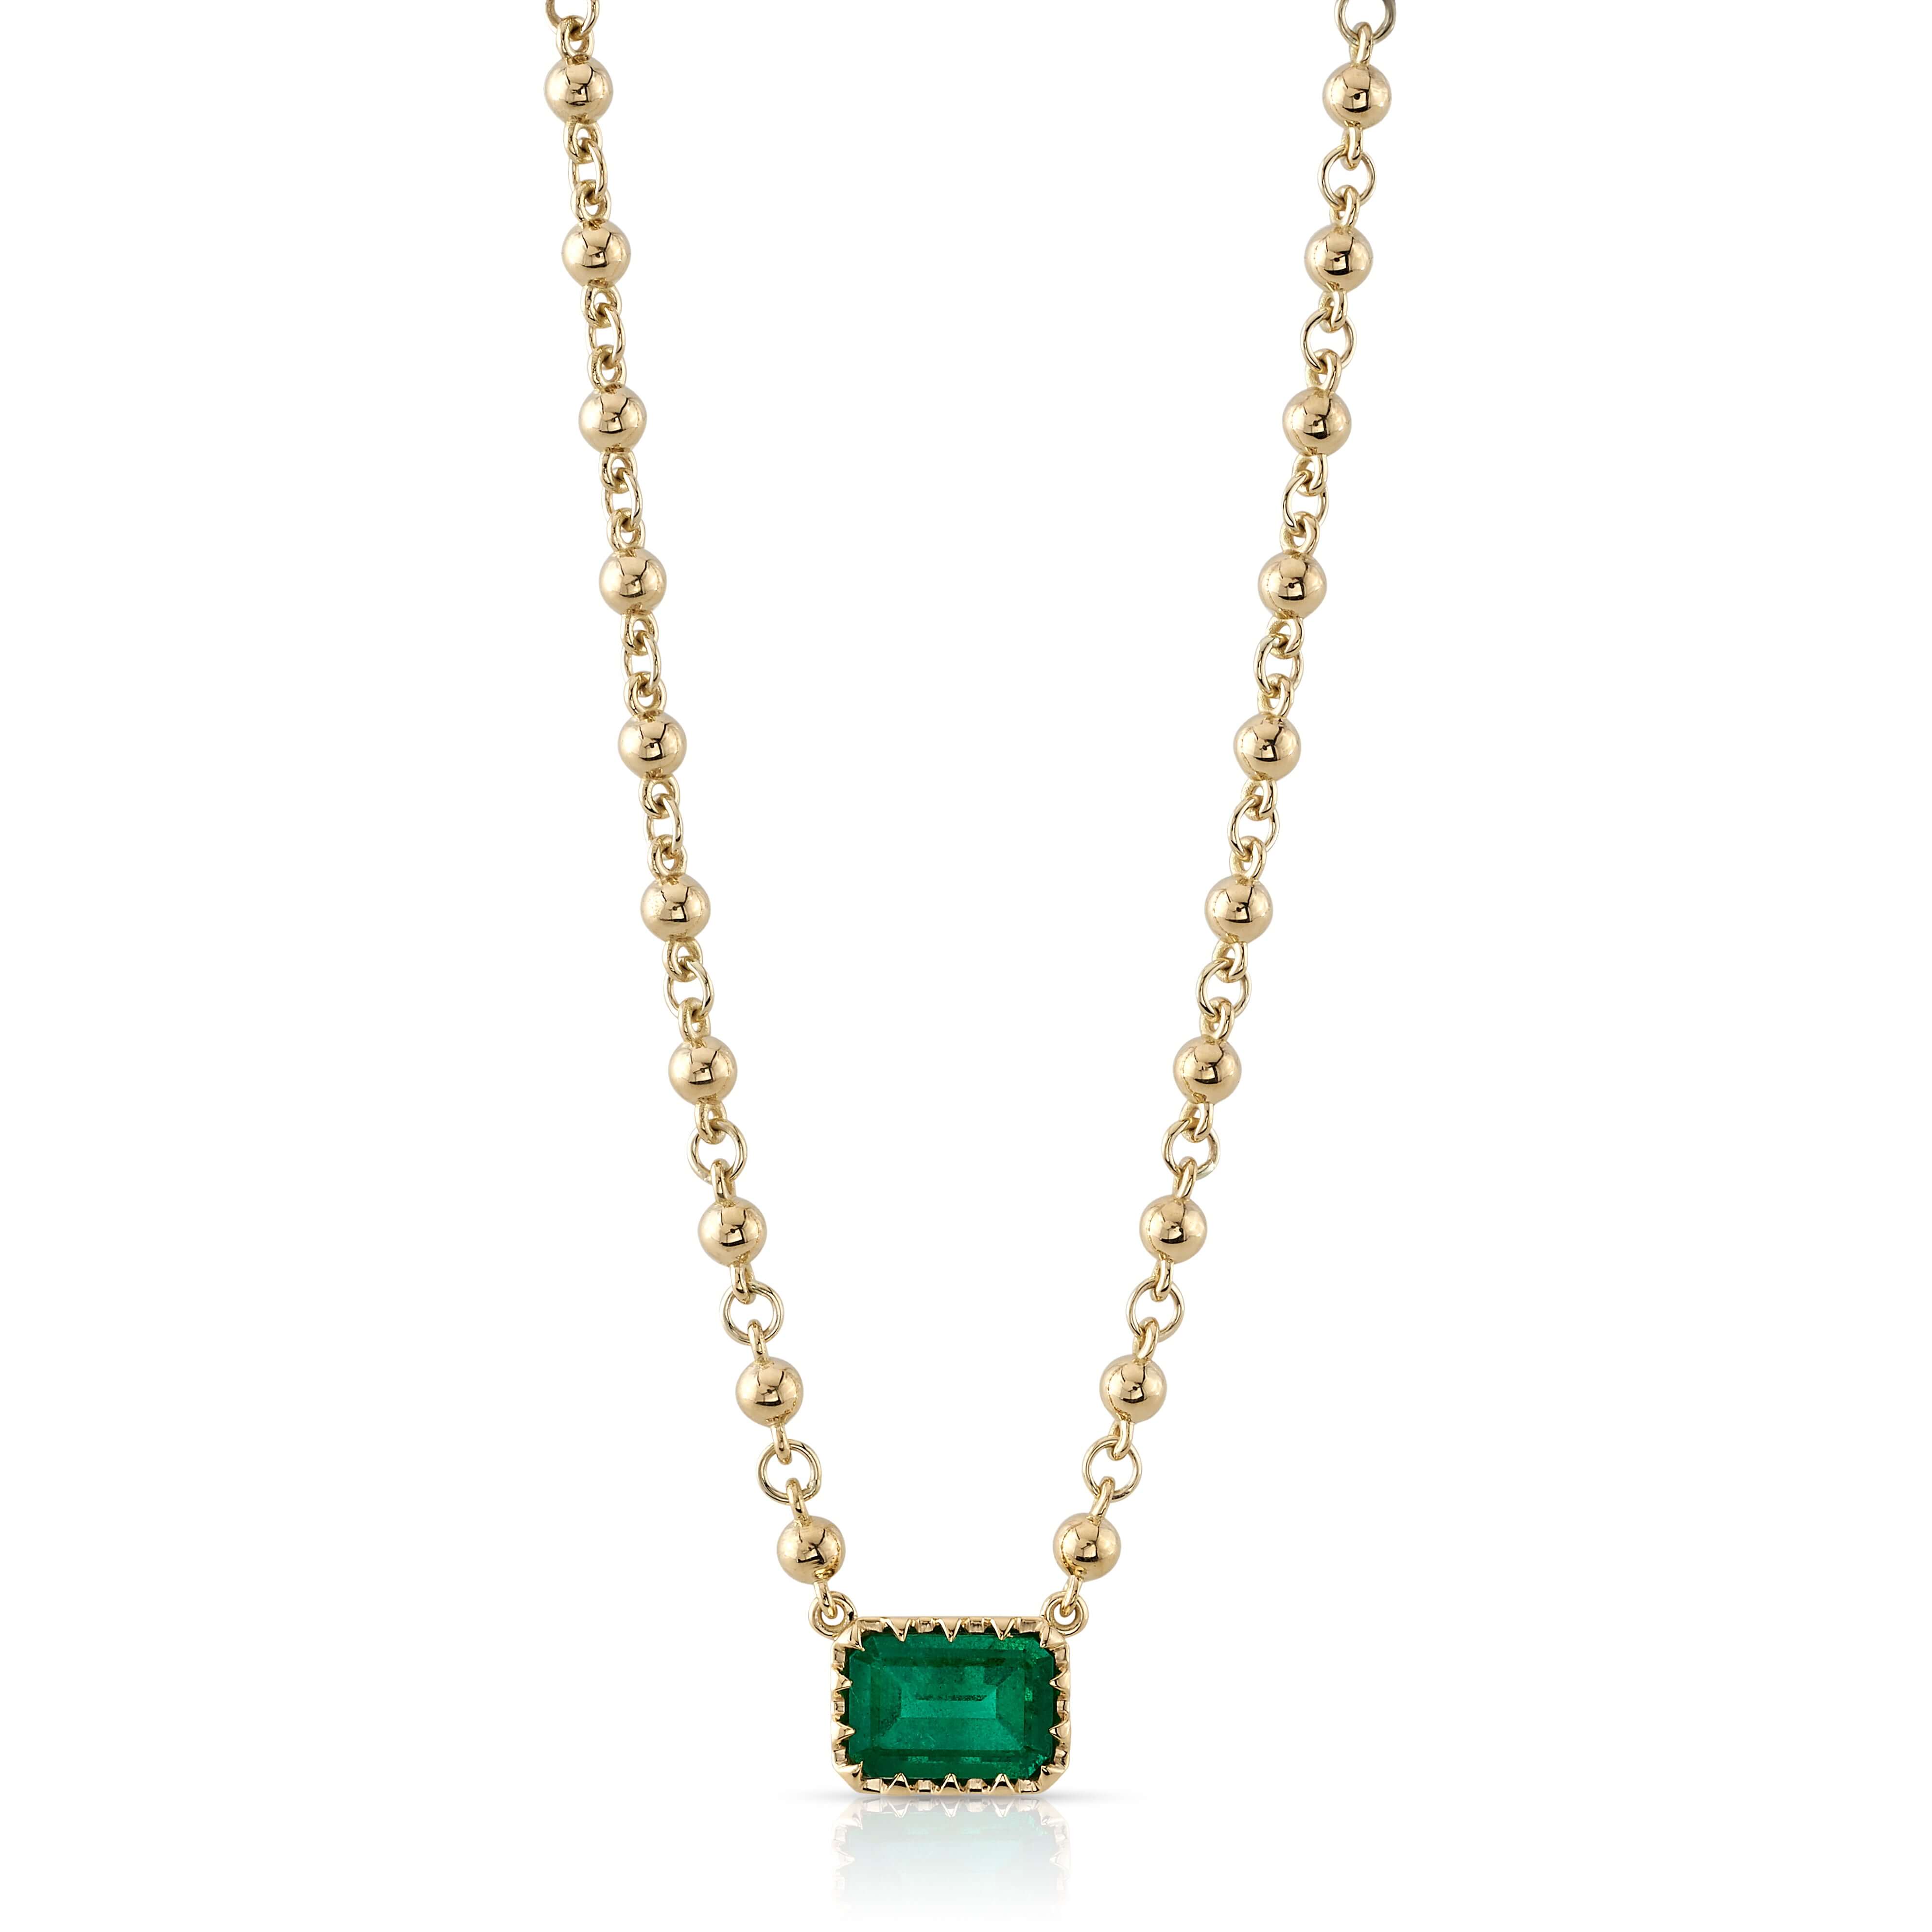 SINGLE STONE ROSALINA NECKLACE featuring 2.75ct emerald cut green emerald prong set on our handcrafted 18K yellow gold rosary chain. Necklace measures 17".